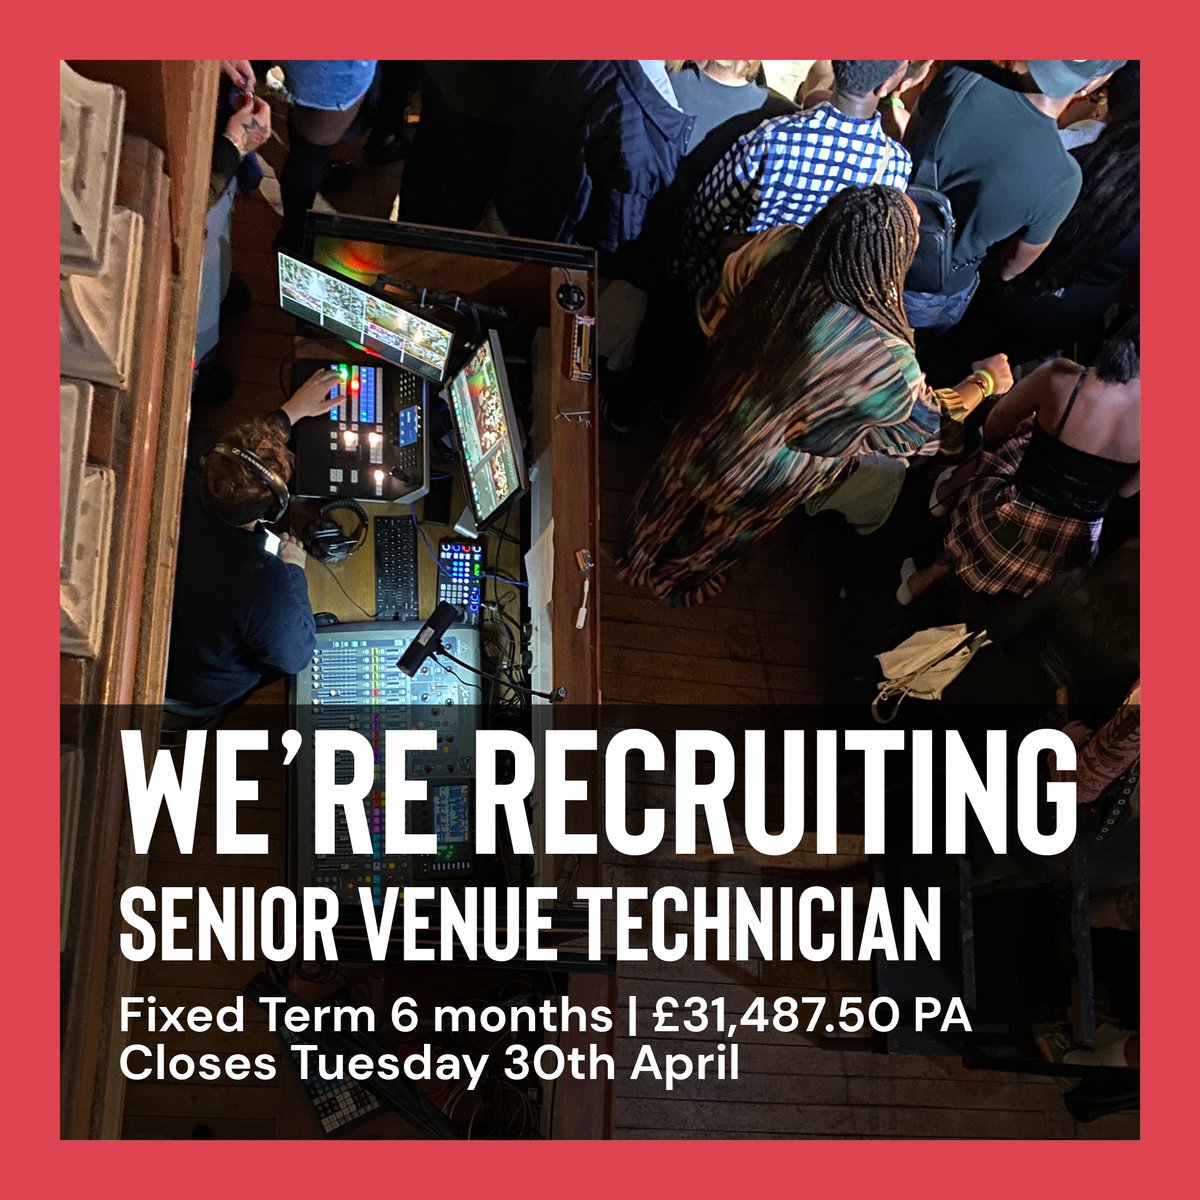 👀Join our Stanley Family, we're on the look out for a Senior Venue Technician! 👉Full-time (Fixed Term 6mnths) | £31,487.50PA 🤔More info, email our Events & Operations Manager, Amie on amie@stanleyarts.org 🔗Download our Recruitment Pack, visit 'Recruitment' in the link in bio